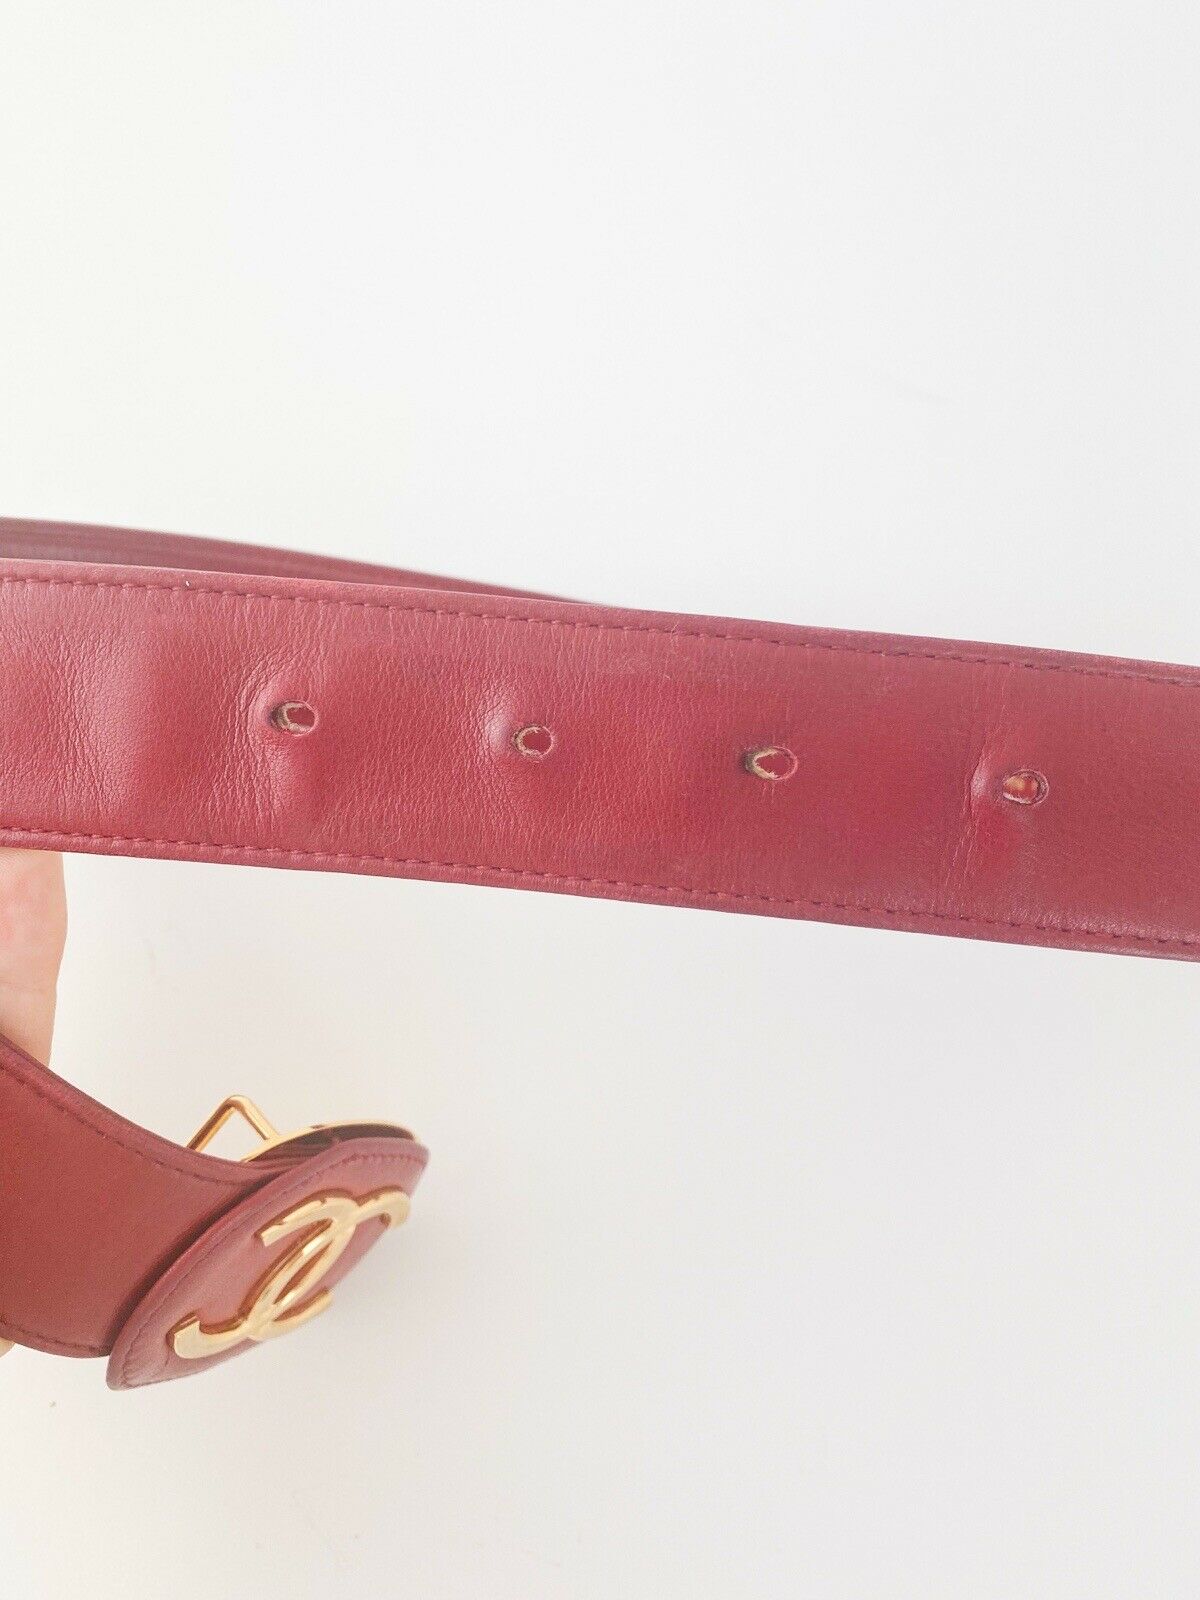 CC Chanel Vintage Leather Belt Logo Red Made in Italy Size 70 / 28 inch